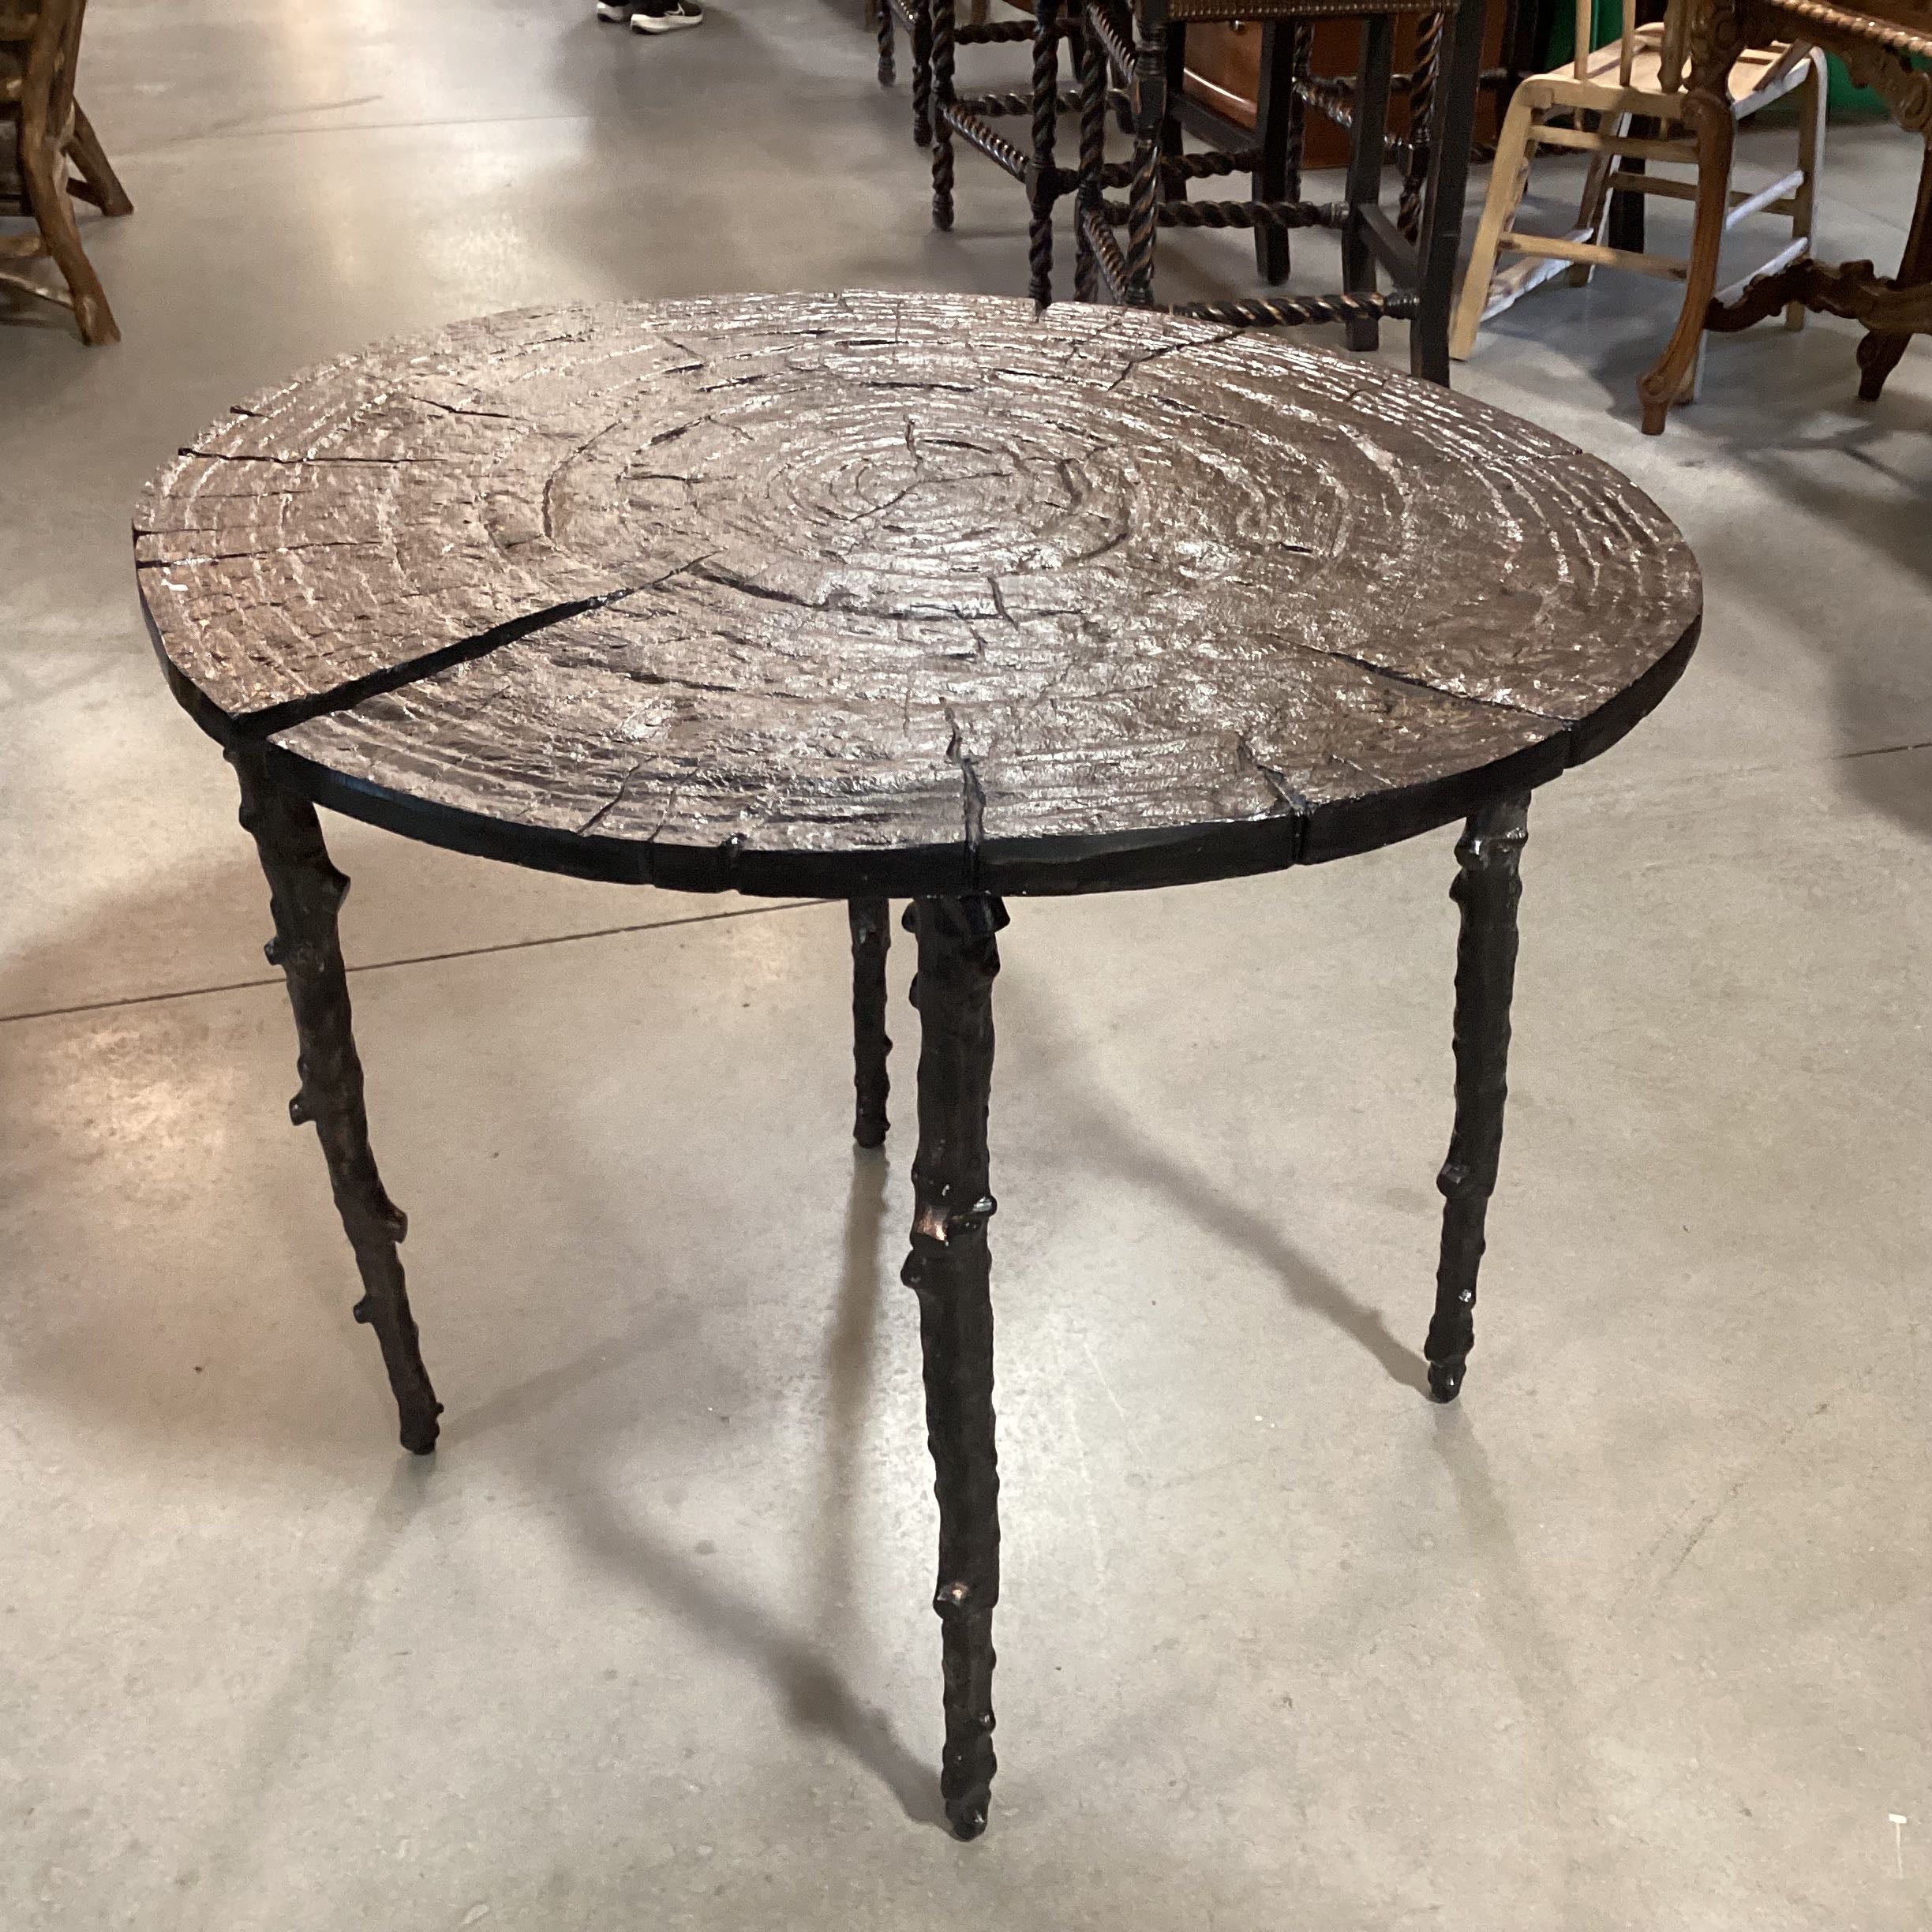 Michael Aram Bronze Enchanted Forest Cafe Table